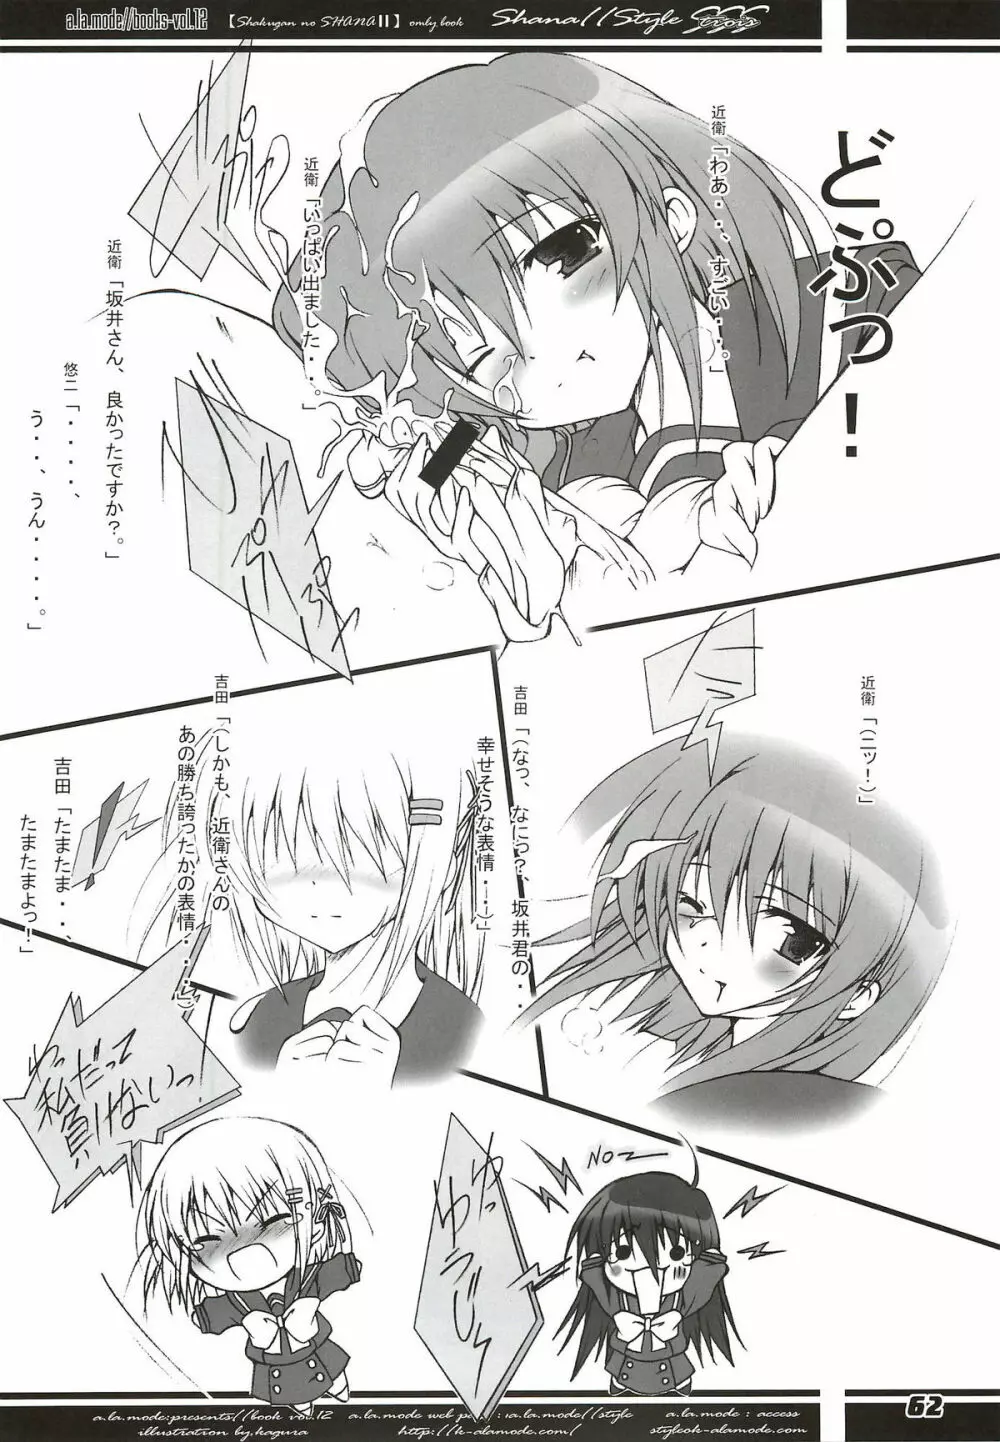 La Collection -Shana／／Style- Page.62